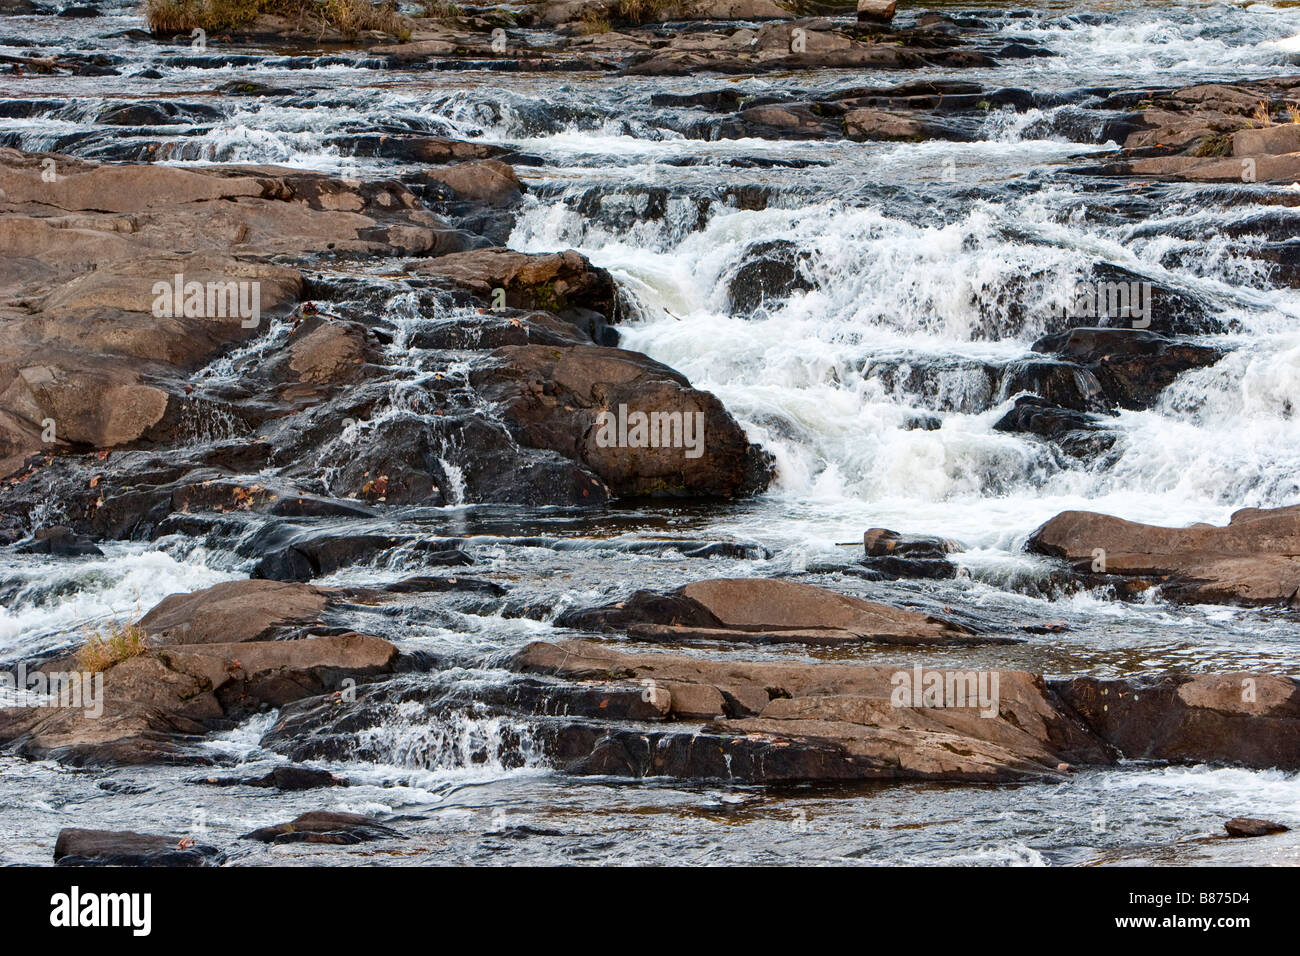 Whitewater clowing over rocks in Vermont October 10 2008 RF Stock Photo